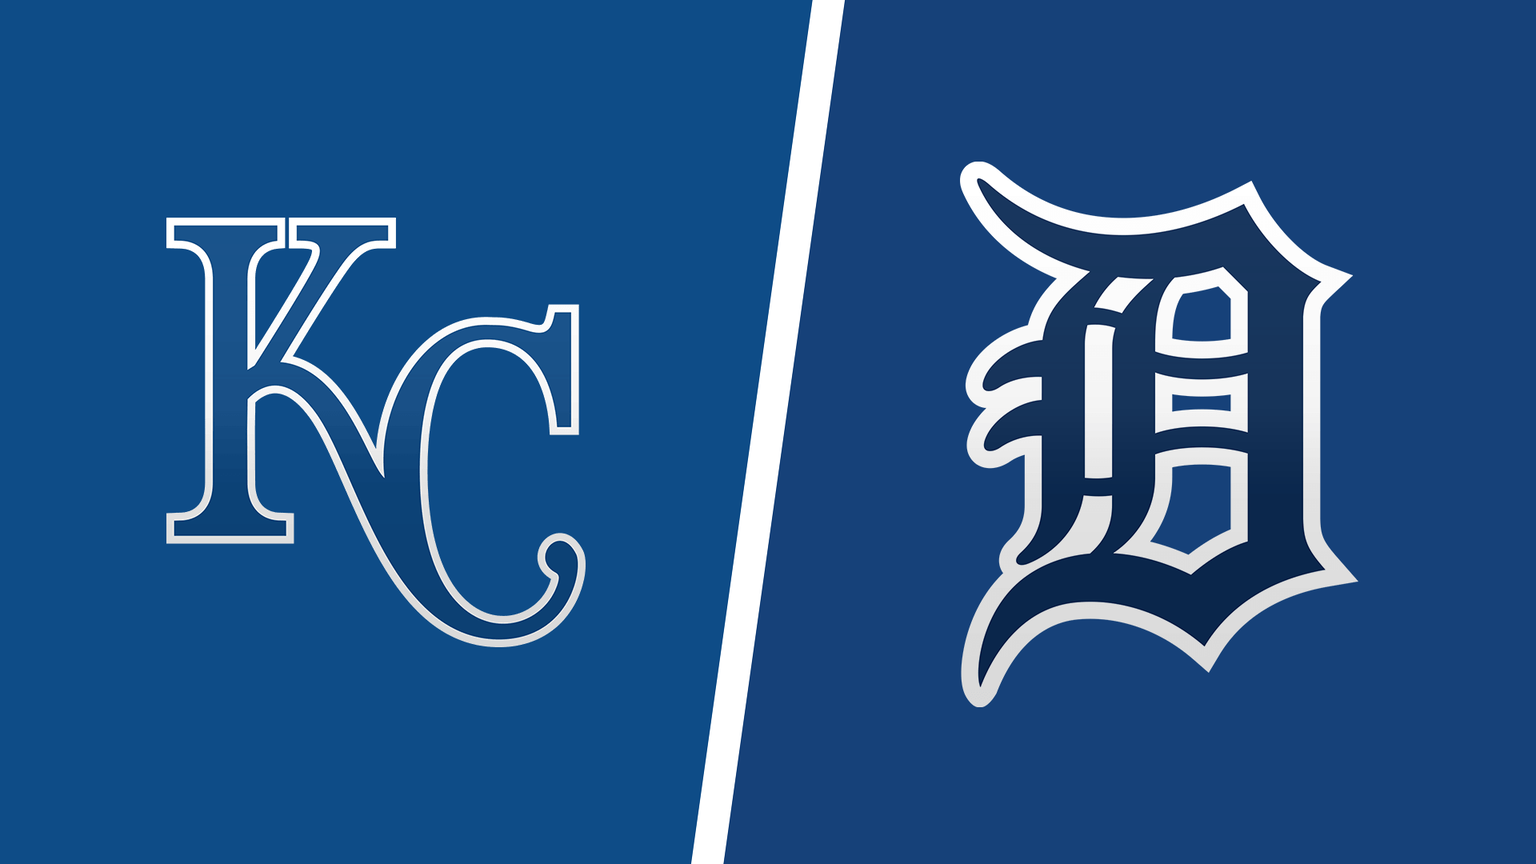 How to Watch Detroit Tigers vs. Kansas City Royals Live Online Without